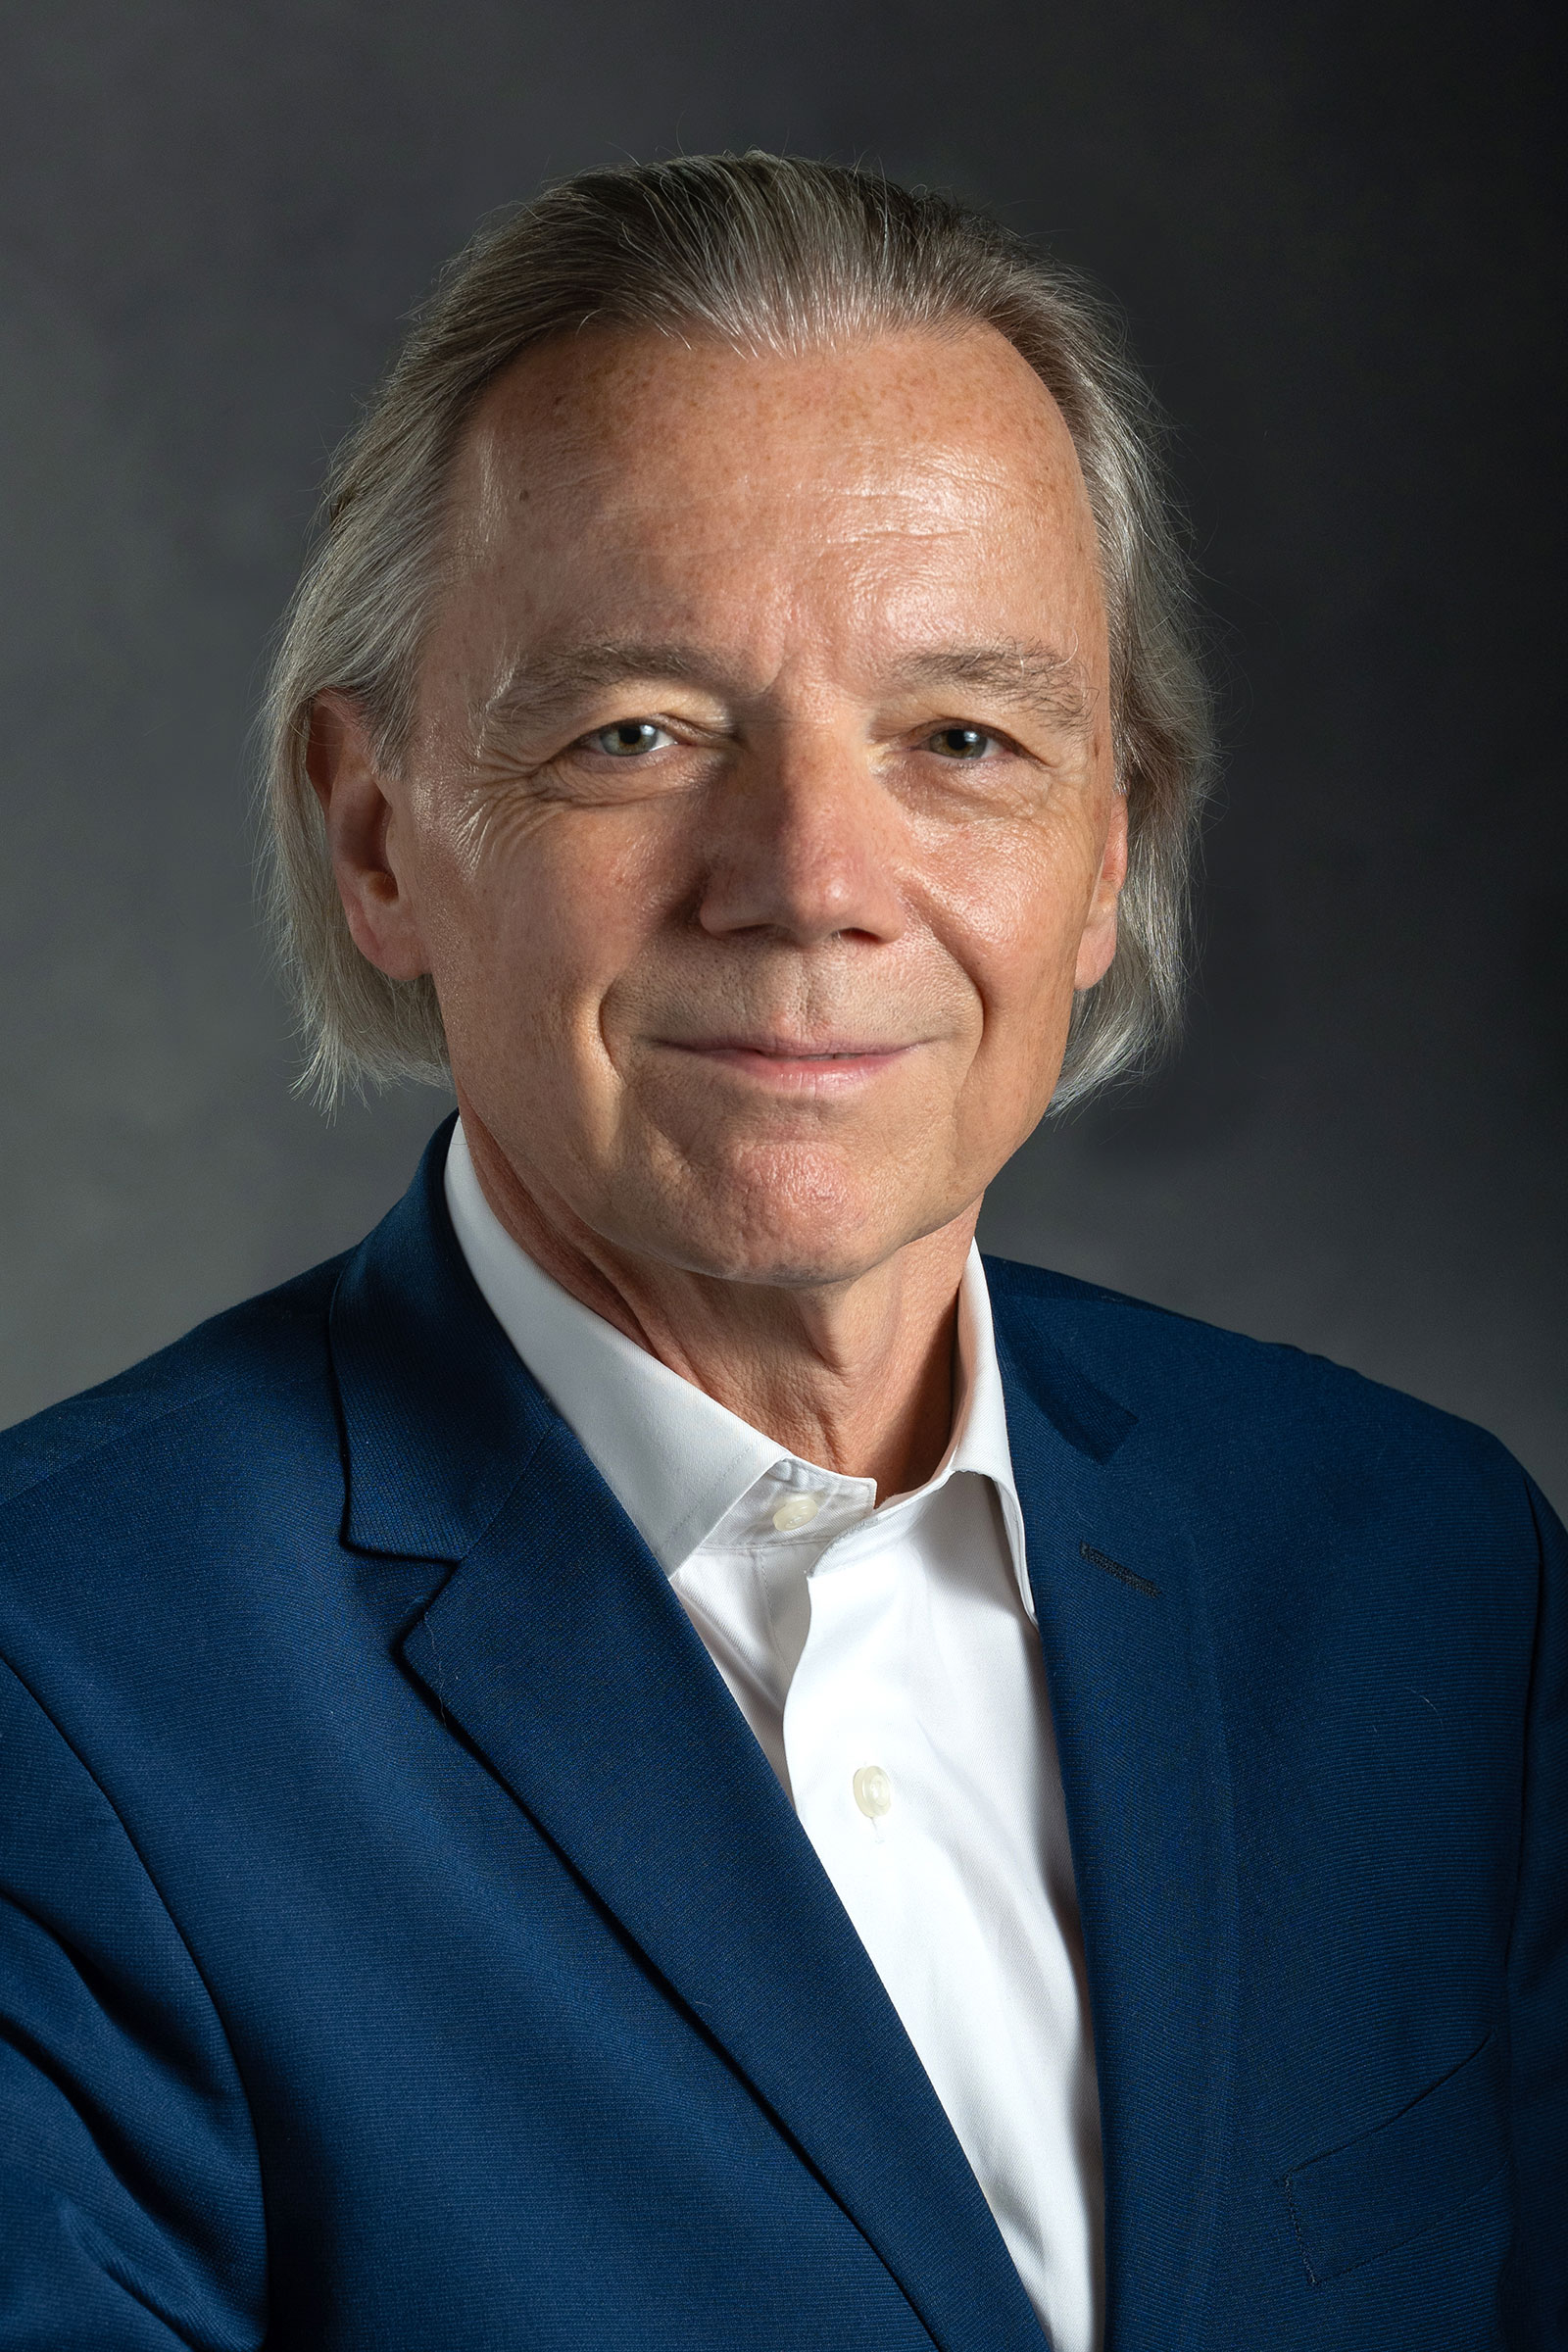 Portrait of Johannes Bauer. He is wearing a navy blue suit jacket and a white shirt. A gray background is behind him.